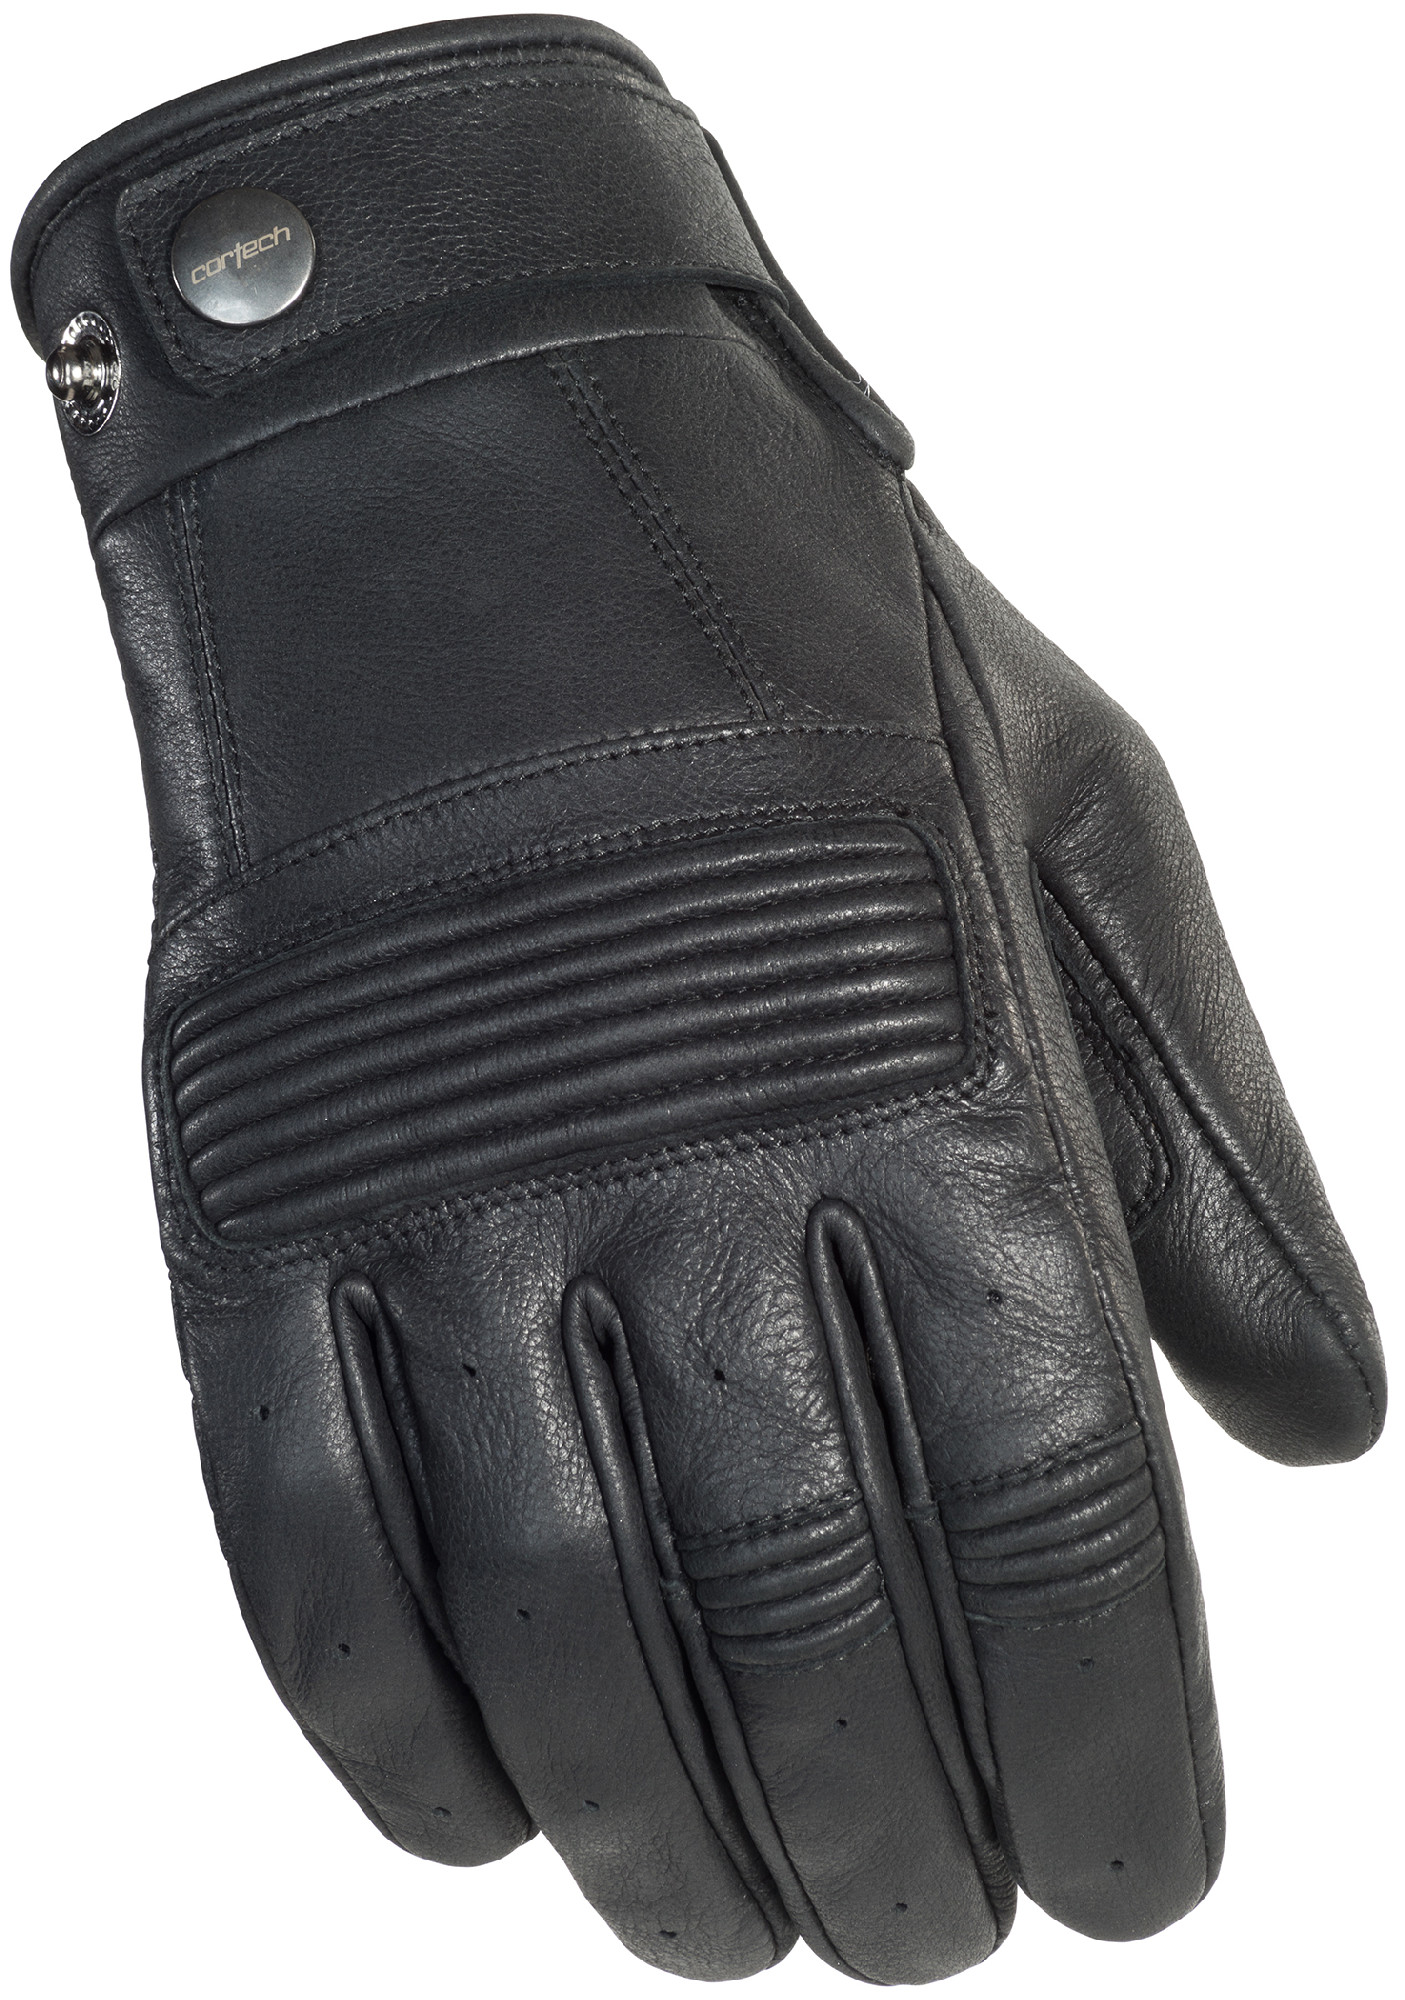 Cortech Mens Rustic Black Duster Leather Motorcycle Gloves | eBay